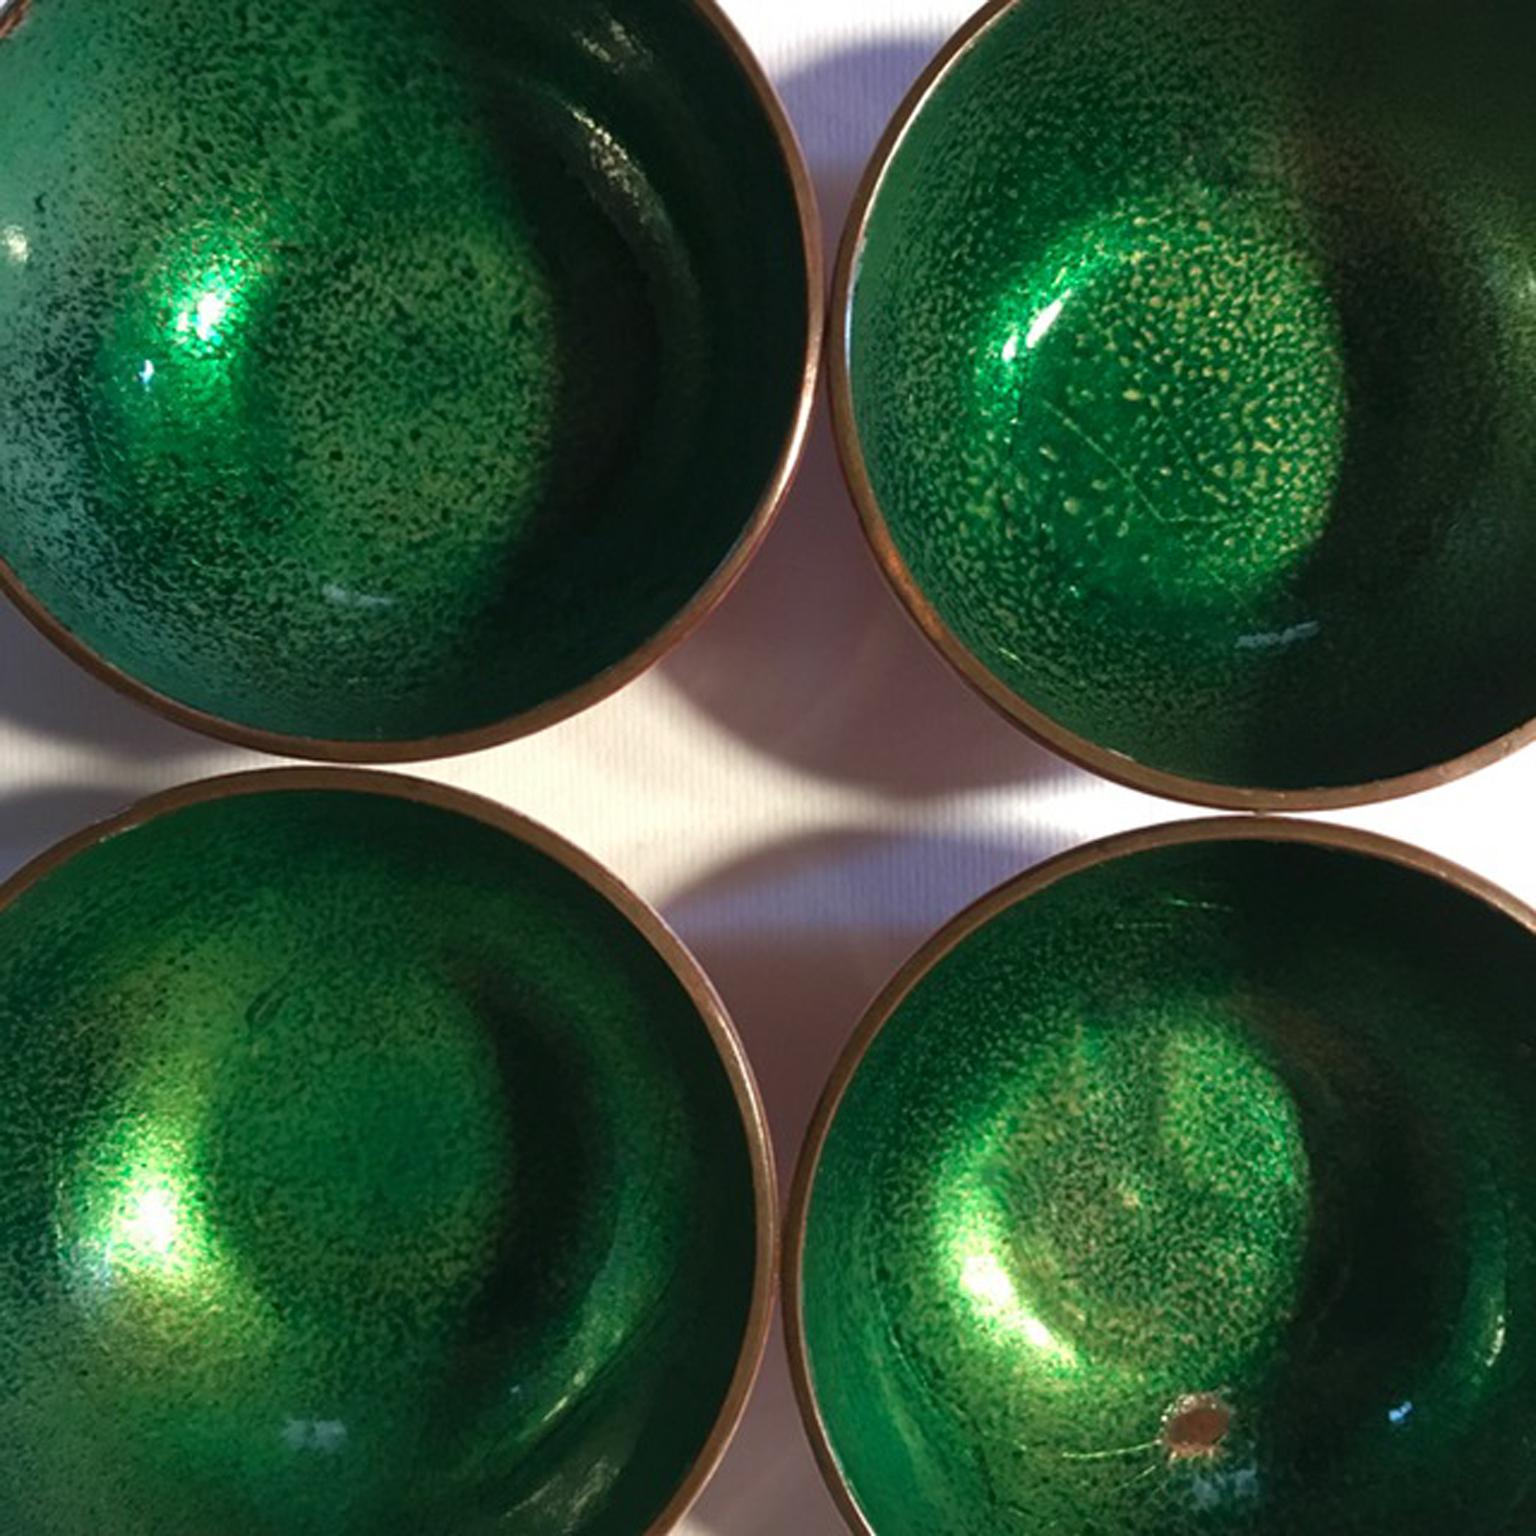 This set of 4 malachite green colored anameled copper bowls is handcrafted by Fabio De Poli a  Mid Century  Italian artist well known for the vivid colors of his artworks.
Fine and elegant pieces on a dining table or a desk. 